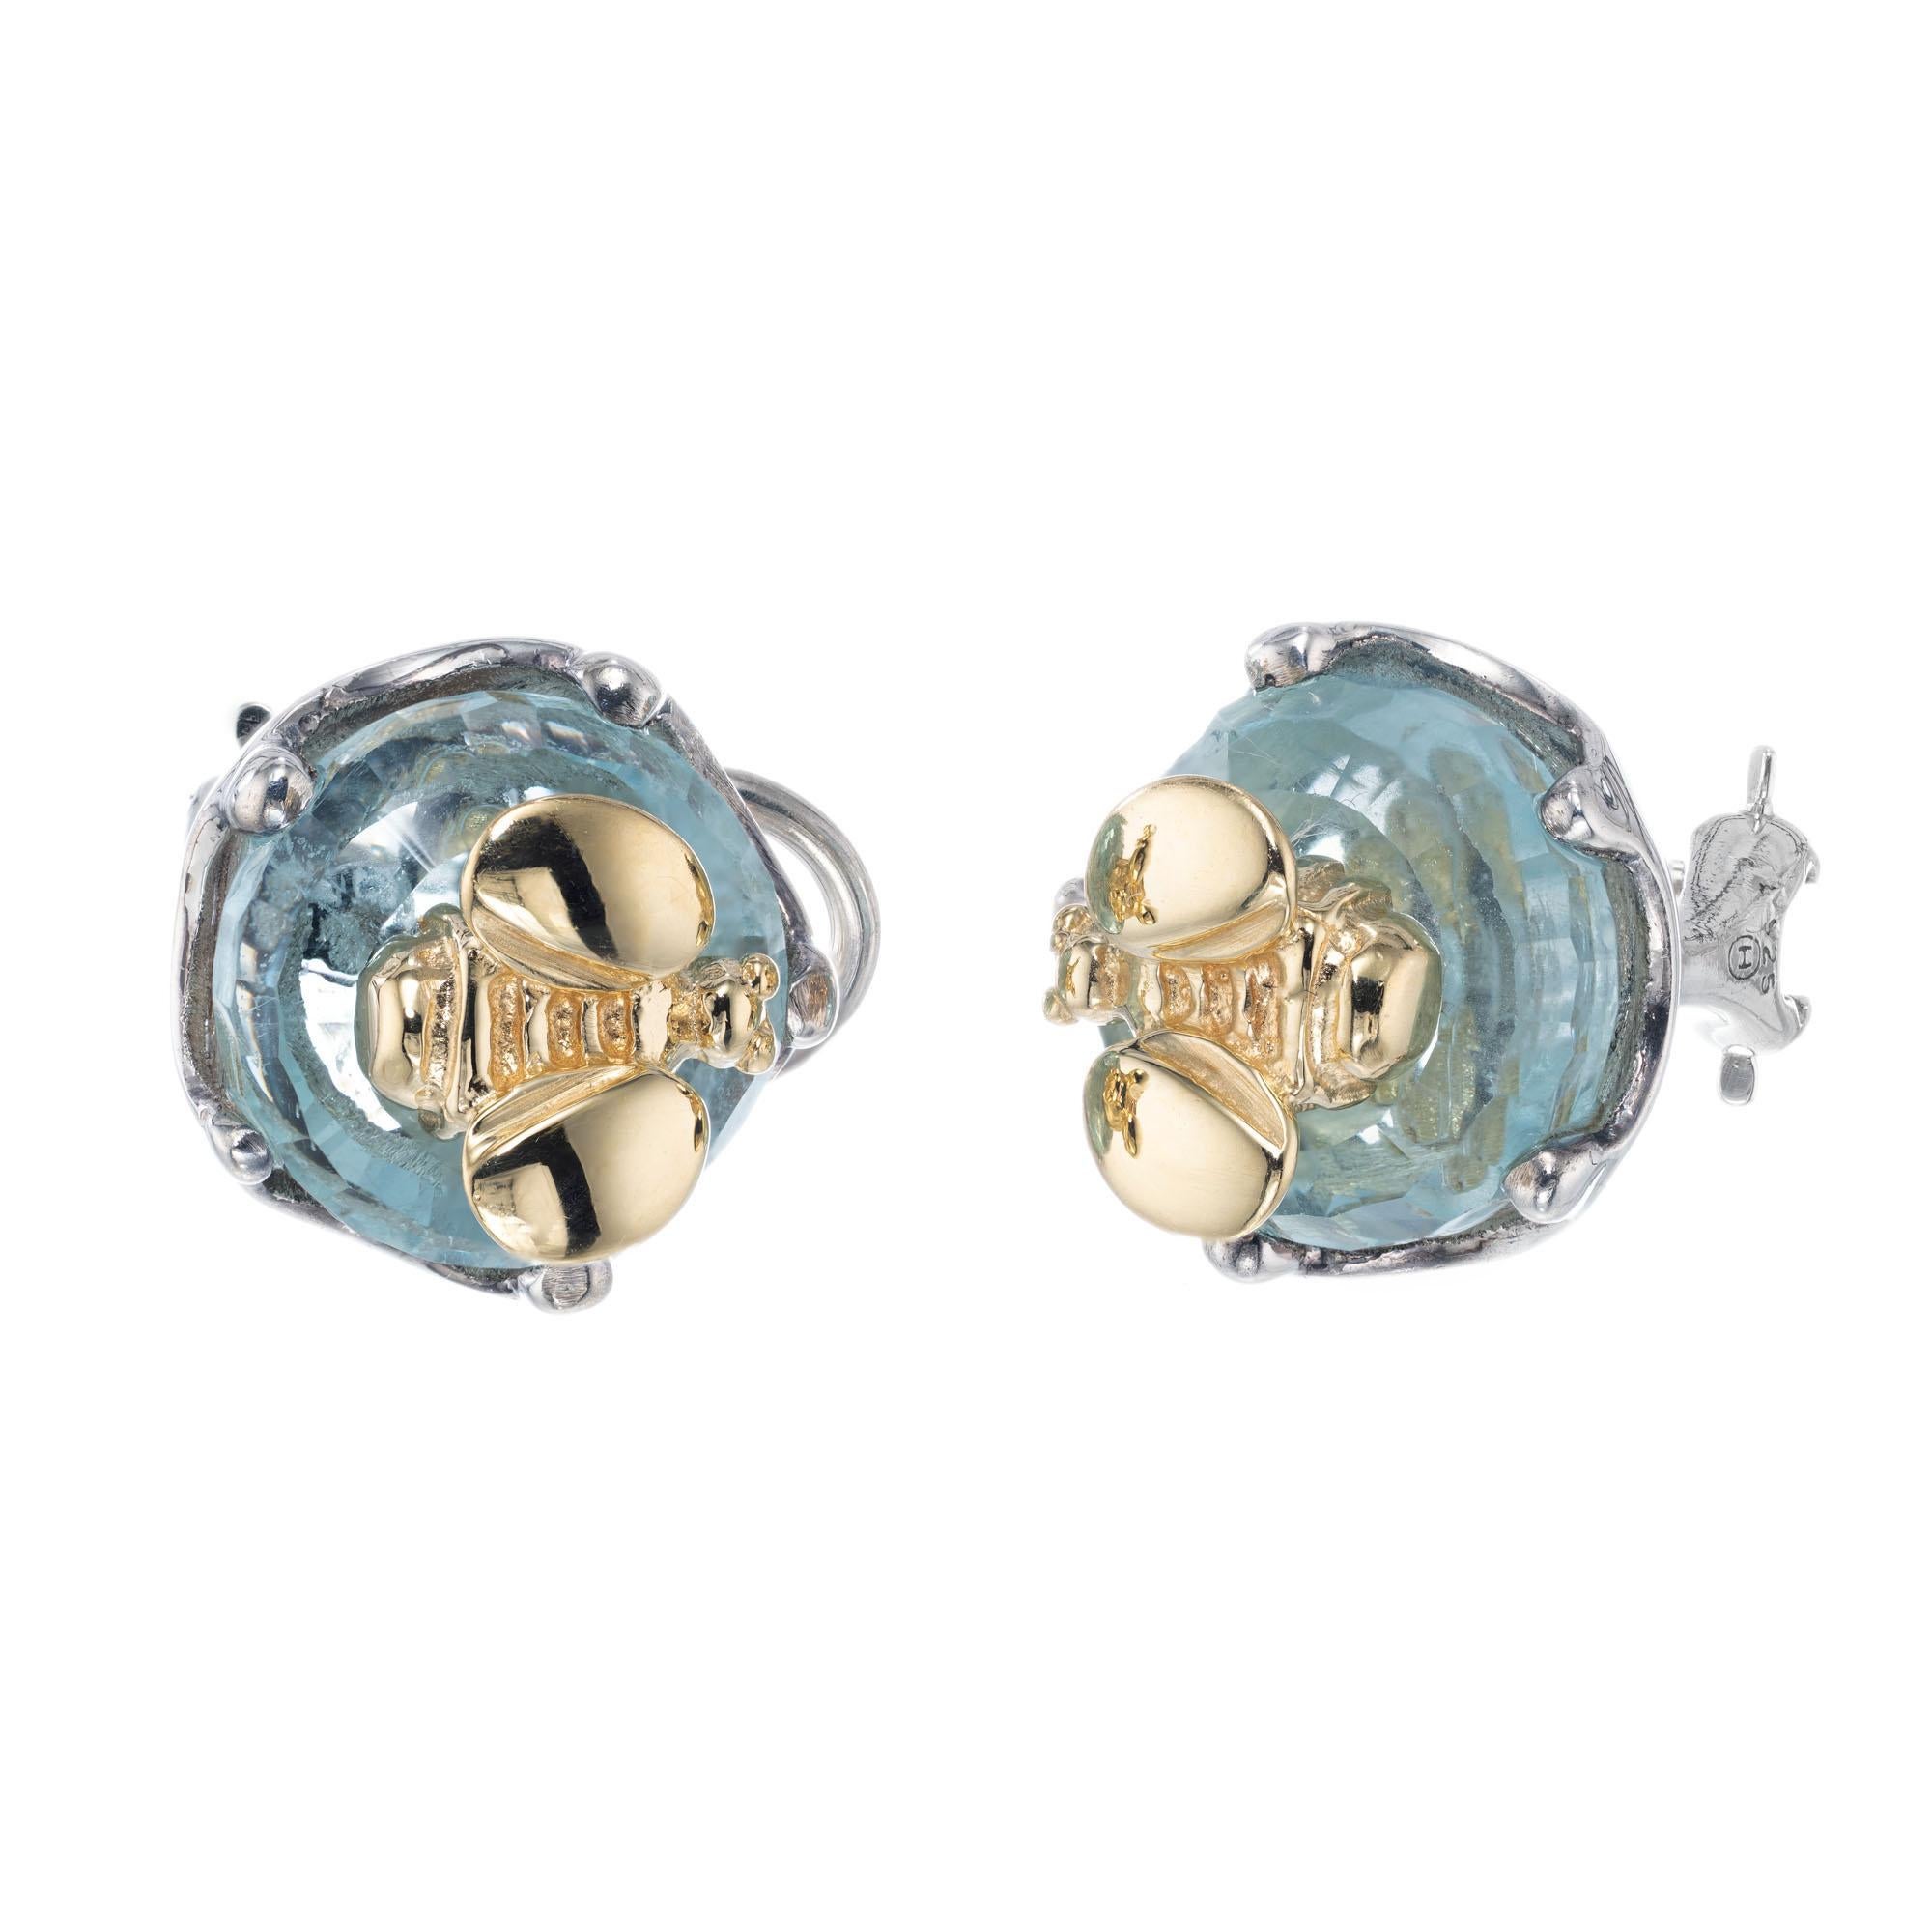 Aquamarine and bee earrings in 18k yellow gold and sterling silver from designer Saint by Sarah Jane.

2 round faceted cabochon aquamarine, approx. 10.00cts
18k yellow gold 
Sterling Silver
Stamped: 925 18k
Hallmark: Saint
12.1 grams
Top to bottom: